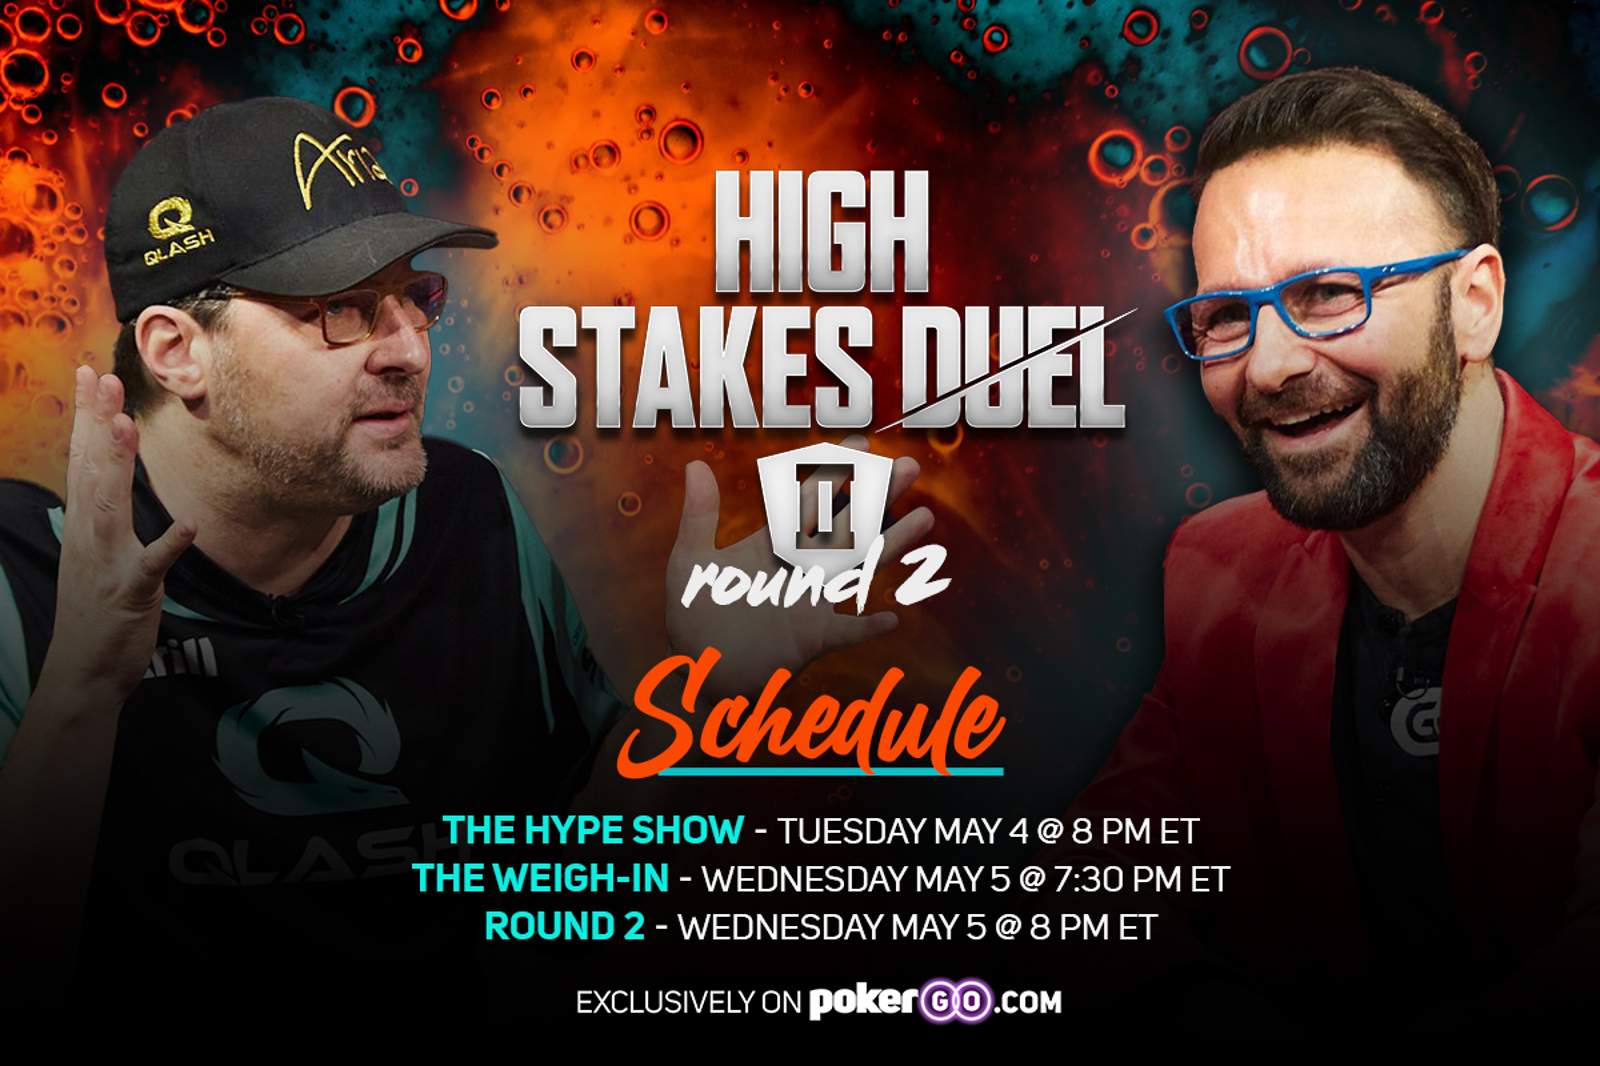 Round 2 of High Stakes Duel II Schedule - 3 Different Shows Over 2 Nights